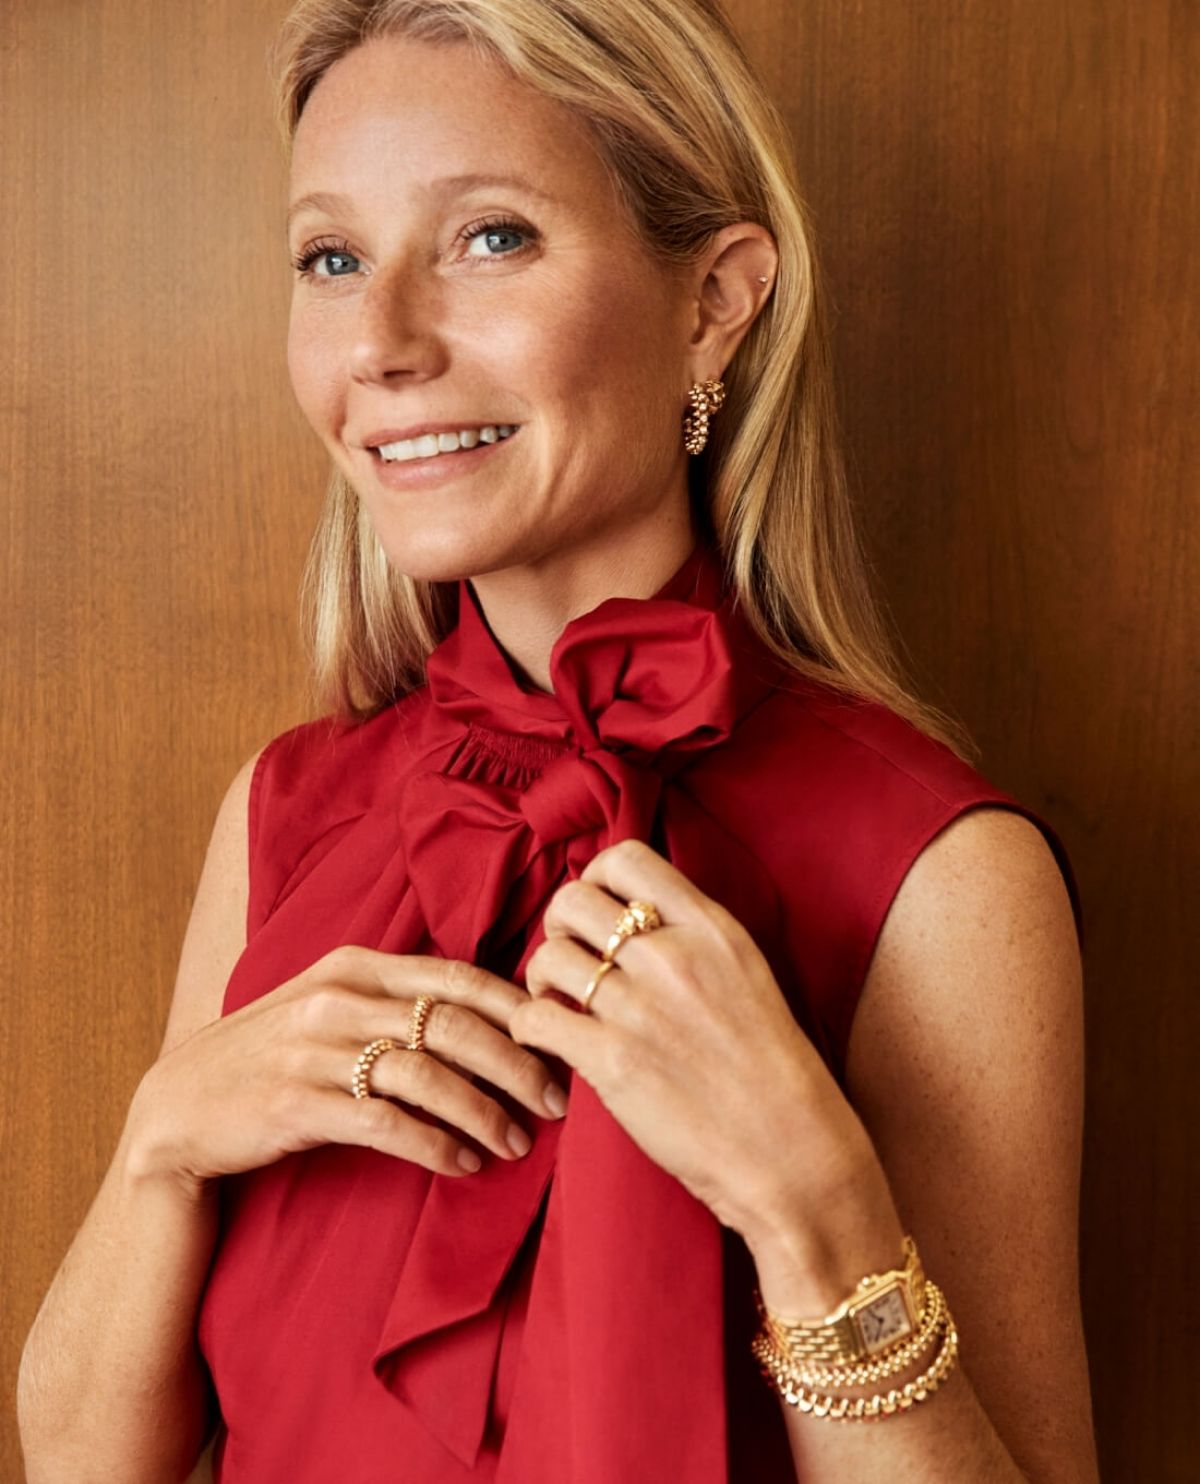 https://www.hawtcelebs.com/wp-content/uploads/2021/10/gwyneth-paltrow-for-goop-g.-label-core-collection-october-2021-18.jpg